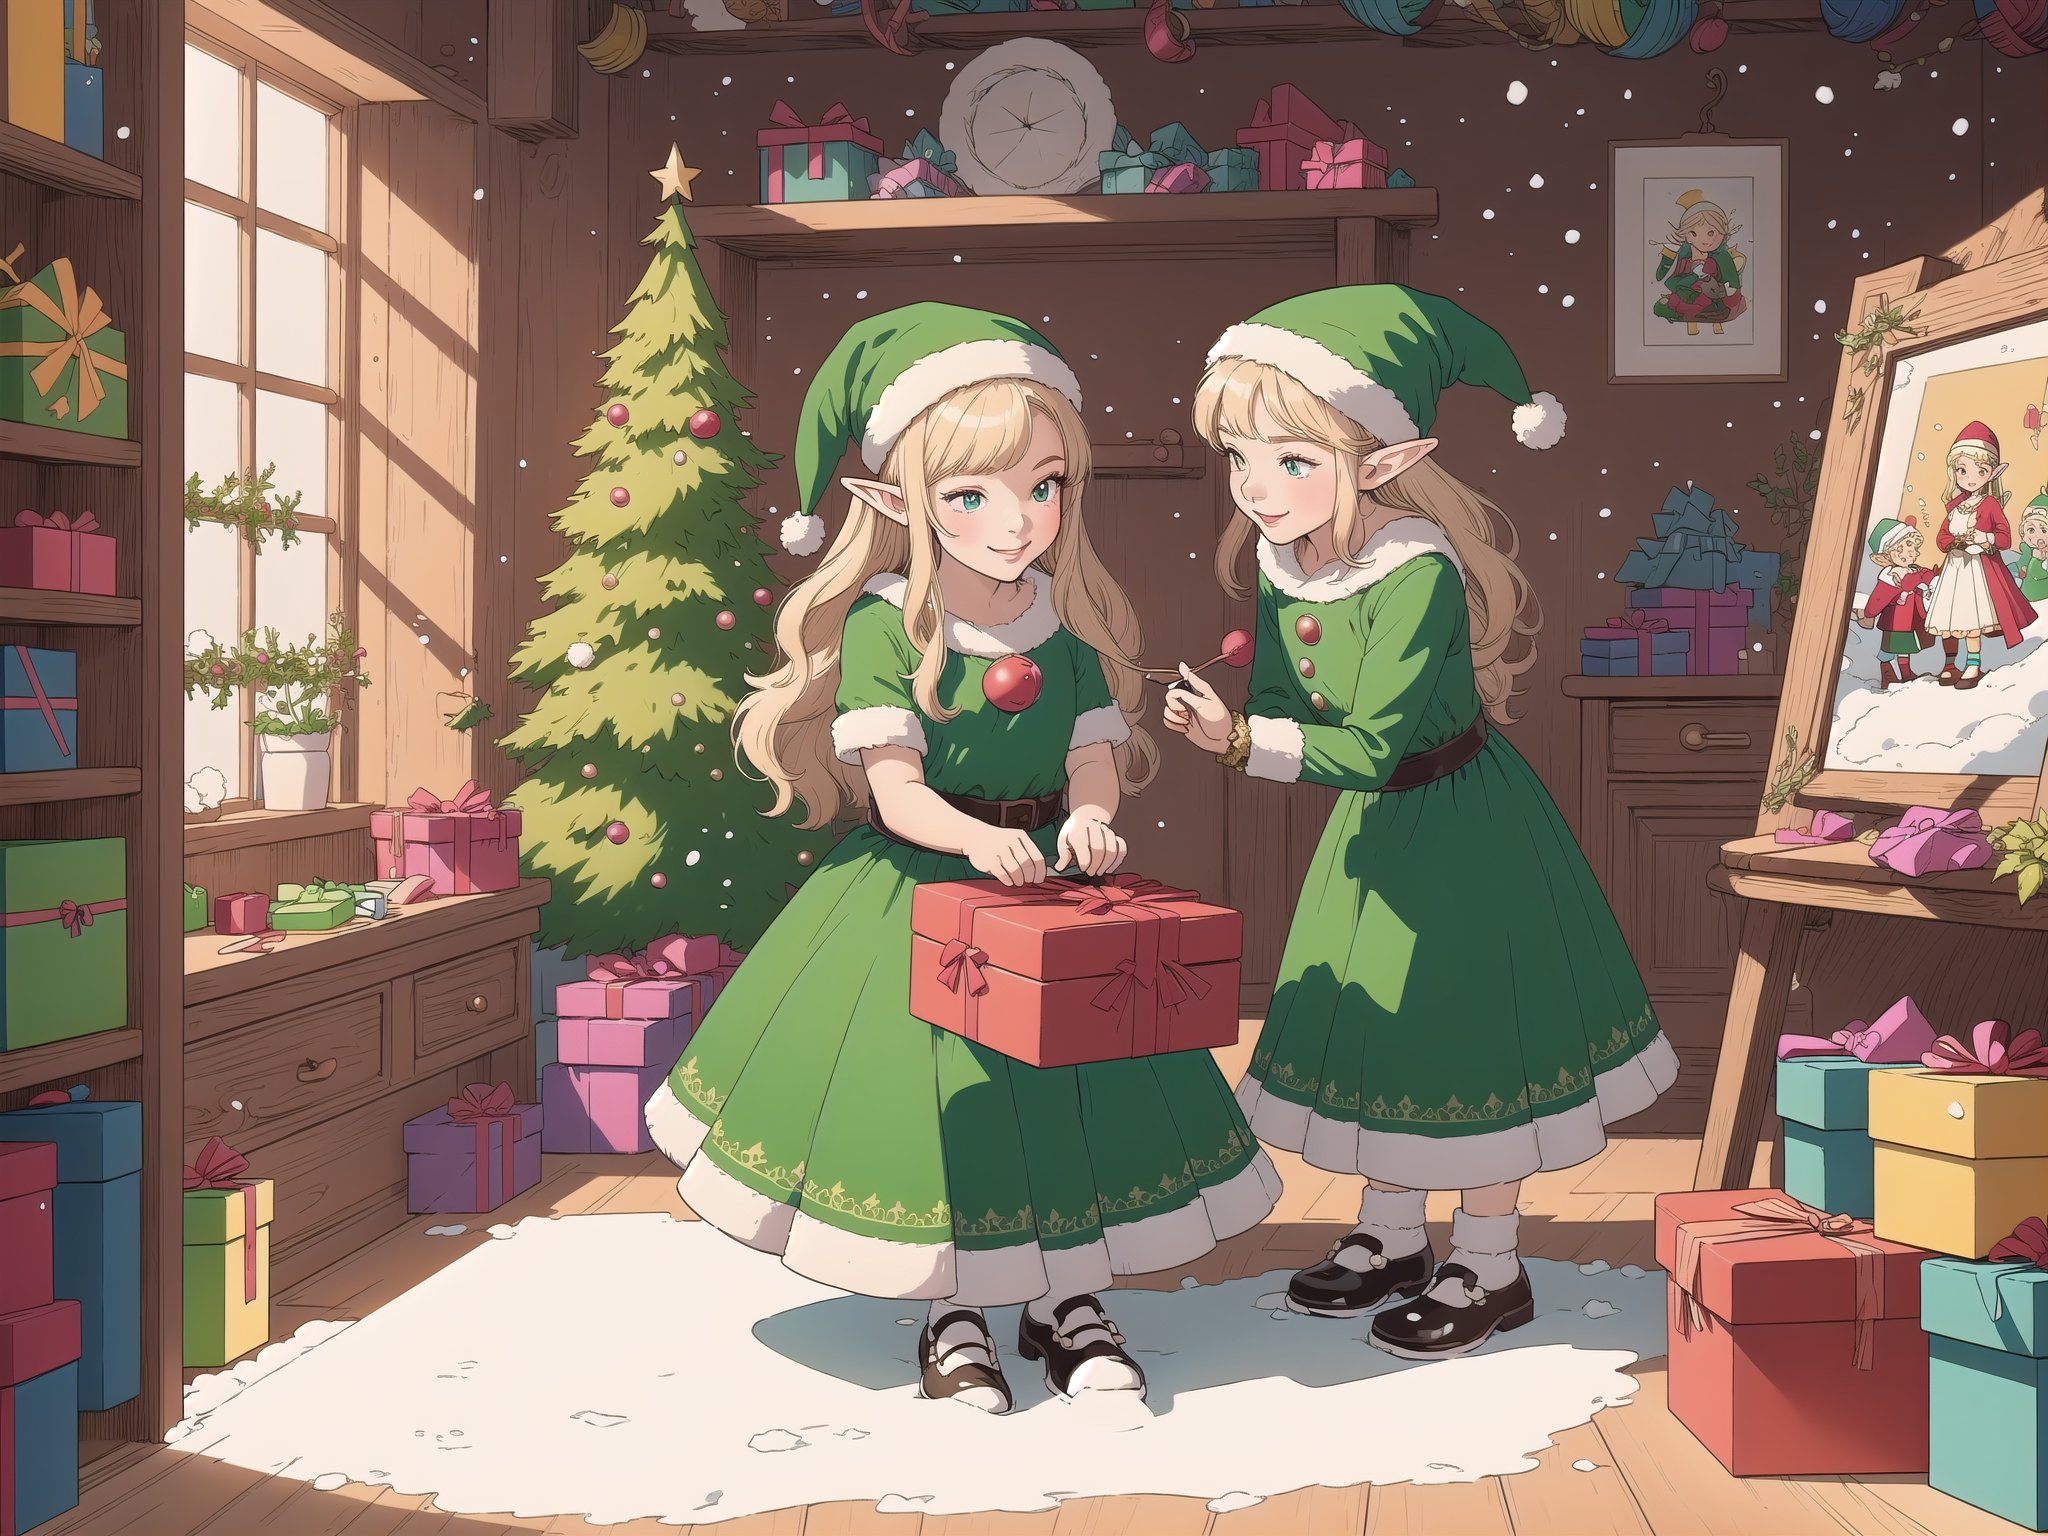 (masterpiece, best quality:1.3), 8k resolution, digital illustration, rup3rt_Style, christmas hair ornament, christmas decorations, santa's workshop, toys, (family), elf hat, bloom, glowing, santa and his elves in the workshop, christmas, elf, eye contact, elf costume, spacious, gift, presents, present box, elf hat, shelf with toys, 1girl, aged down, child, thick lineart, bold lineart, green dress, 2boys, short male, curled shoes, tinsle, garland, wreath, bow, working, indoors, cartoon, painting (object), small details, christmas decorations, extremely detailed background, mid shot, full body, finely detailed face, looking down, smile, weathered, warm tone, wooden floor, shadow, candlelight, dark, (fantasy illustration:1.3), intricate details, looking at another, depth and richness,  falling_snow outside (window)